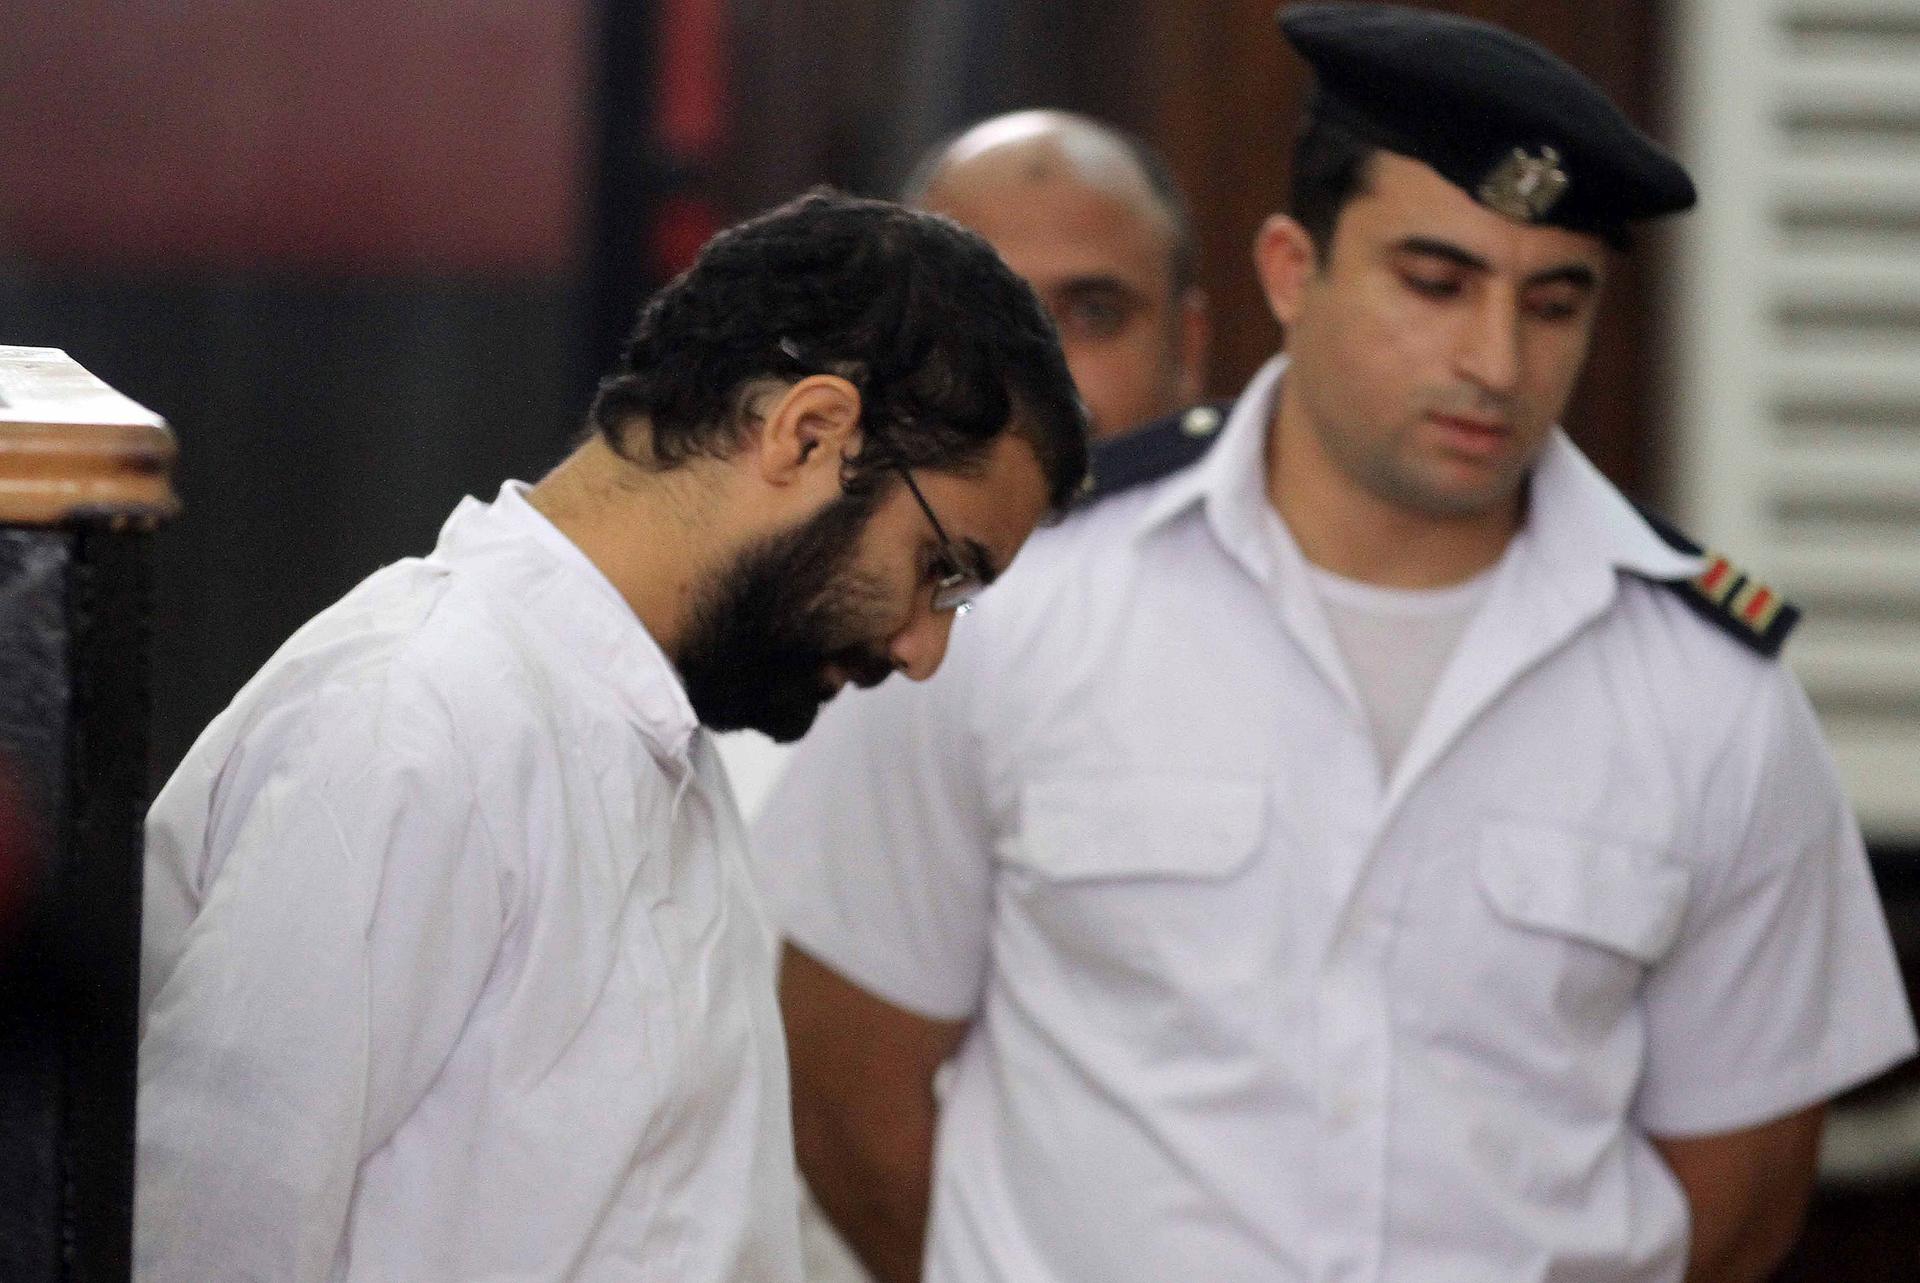 Activist Alaa Abdel Fattah stands in front of a police officer at a court during his trial in Cairo, November 11, 2014.